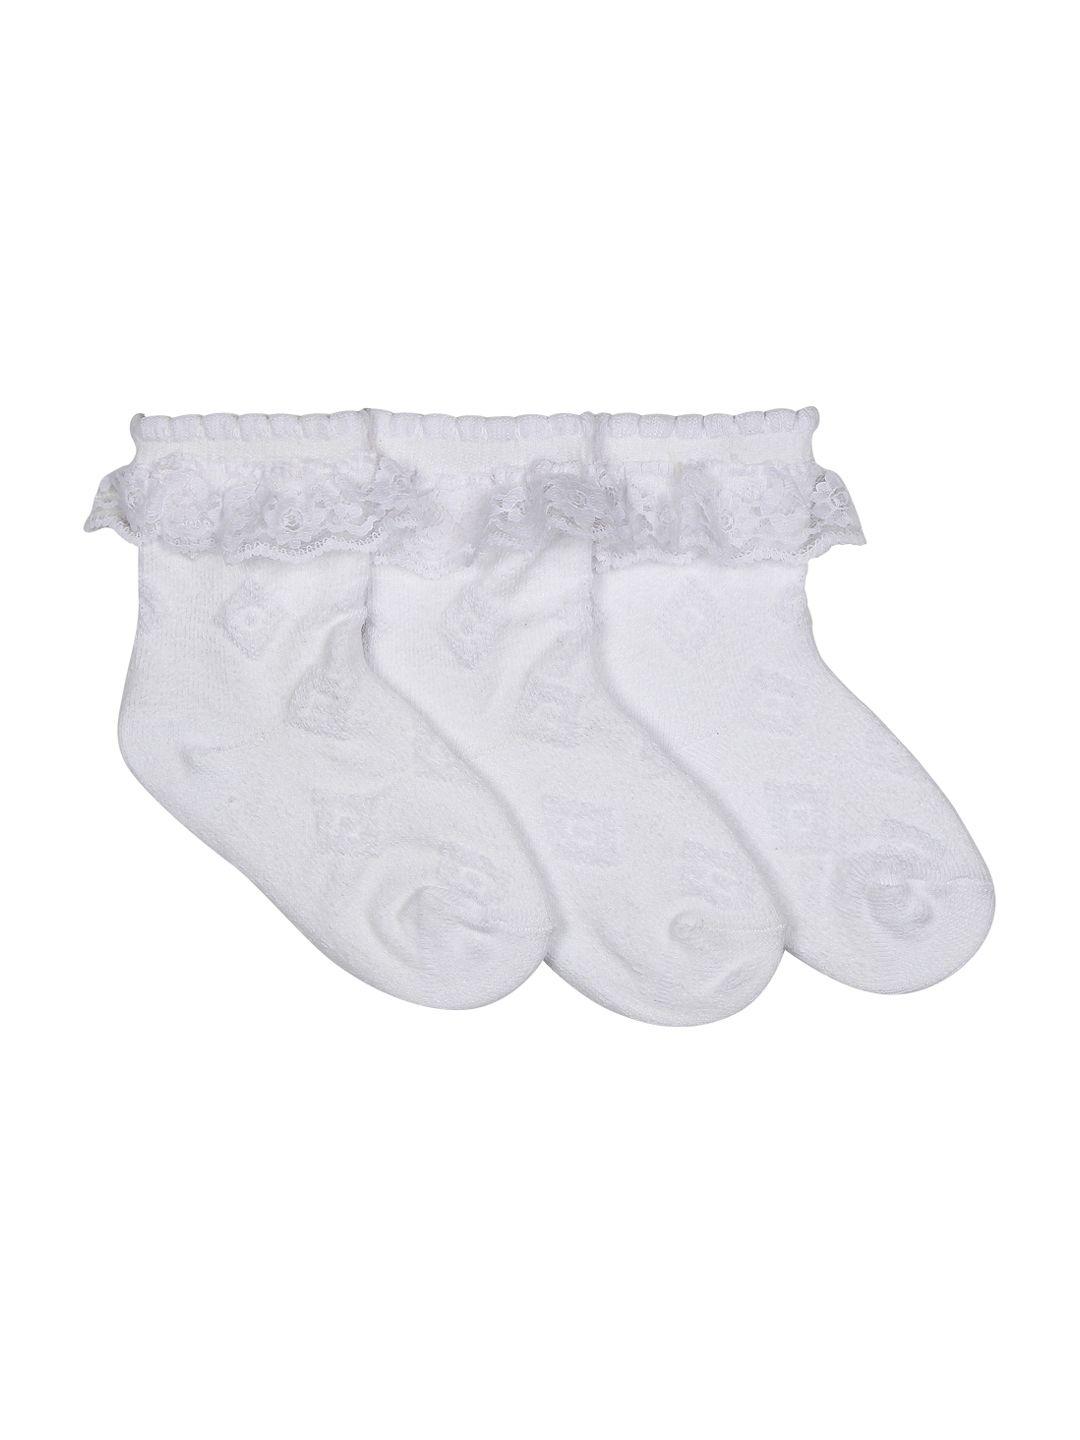 supersox kids pack of 3 white assorted ankle-length socks